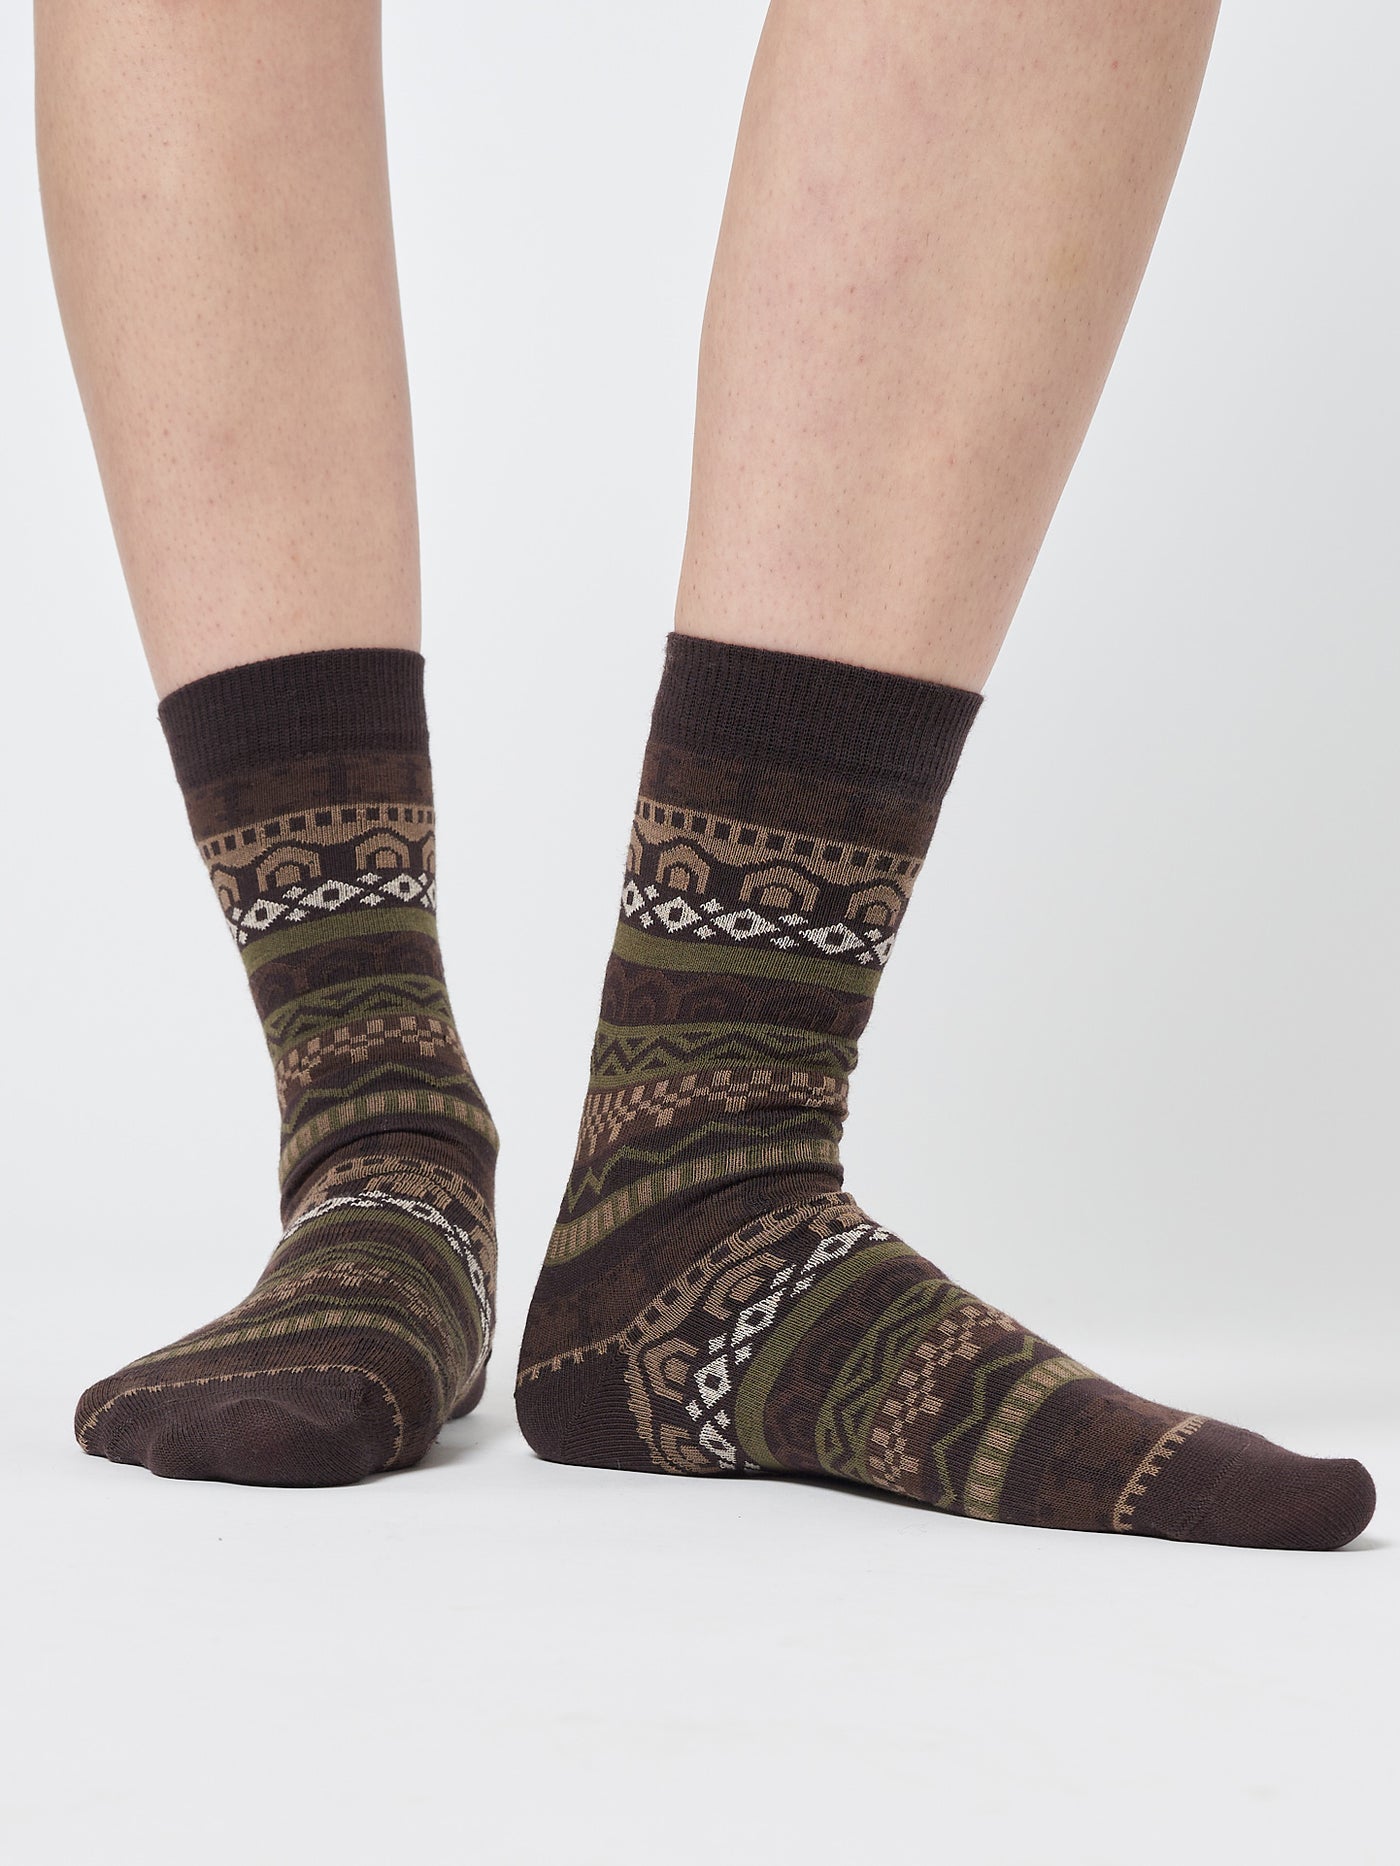 Stay cozy and stylish with these charming jacquard knit socks inspired by classic grandma-style designs.